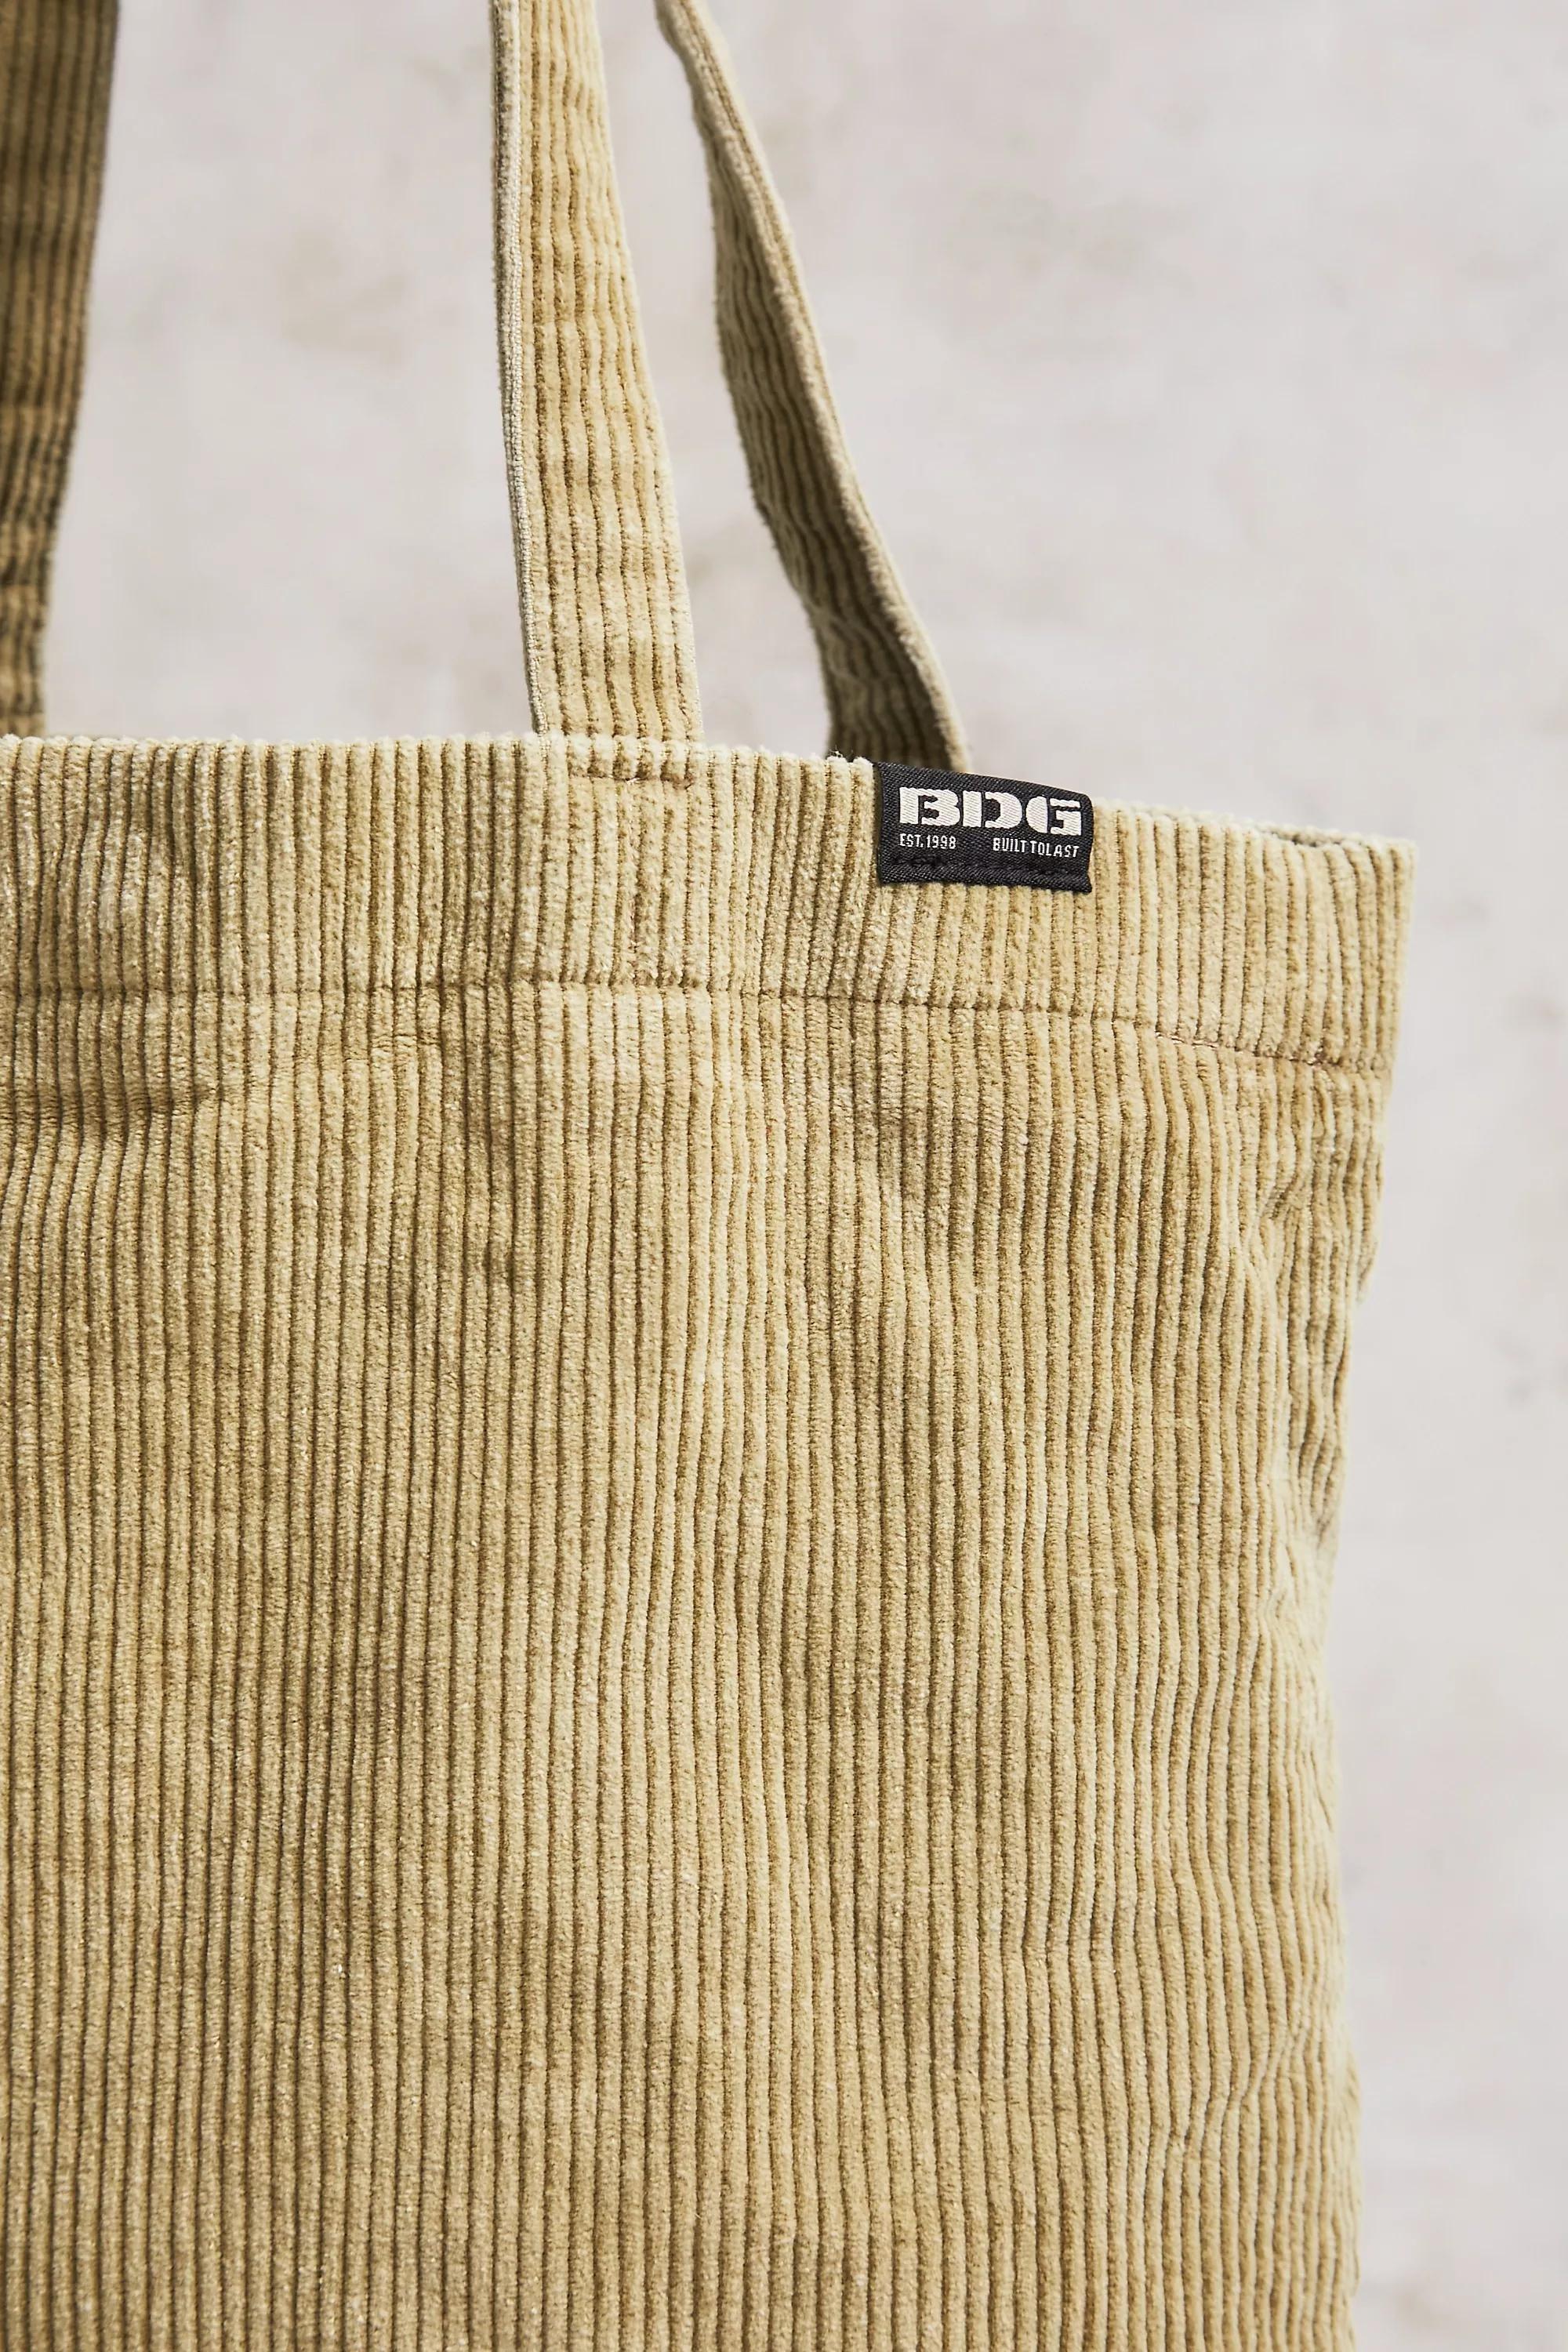 Urban Outfitters - Yellow Bdg Tab Corduroy Tote Bag